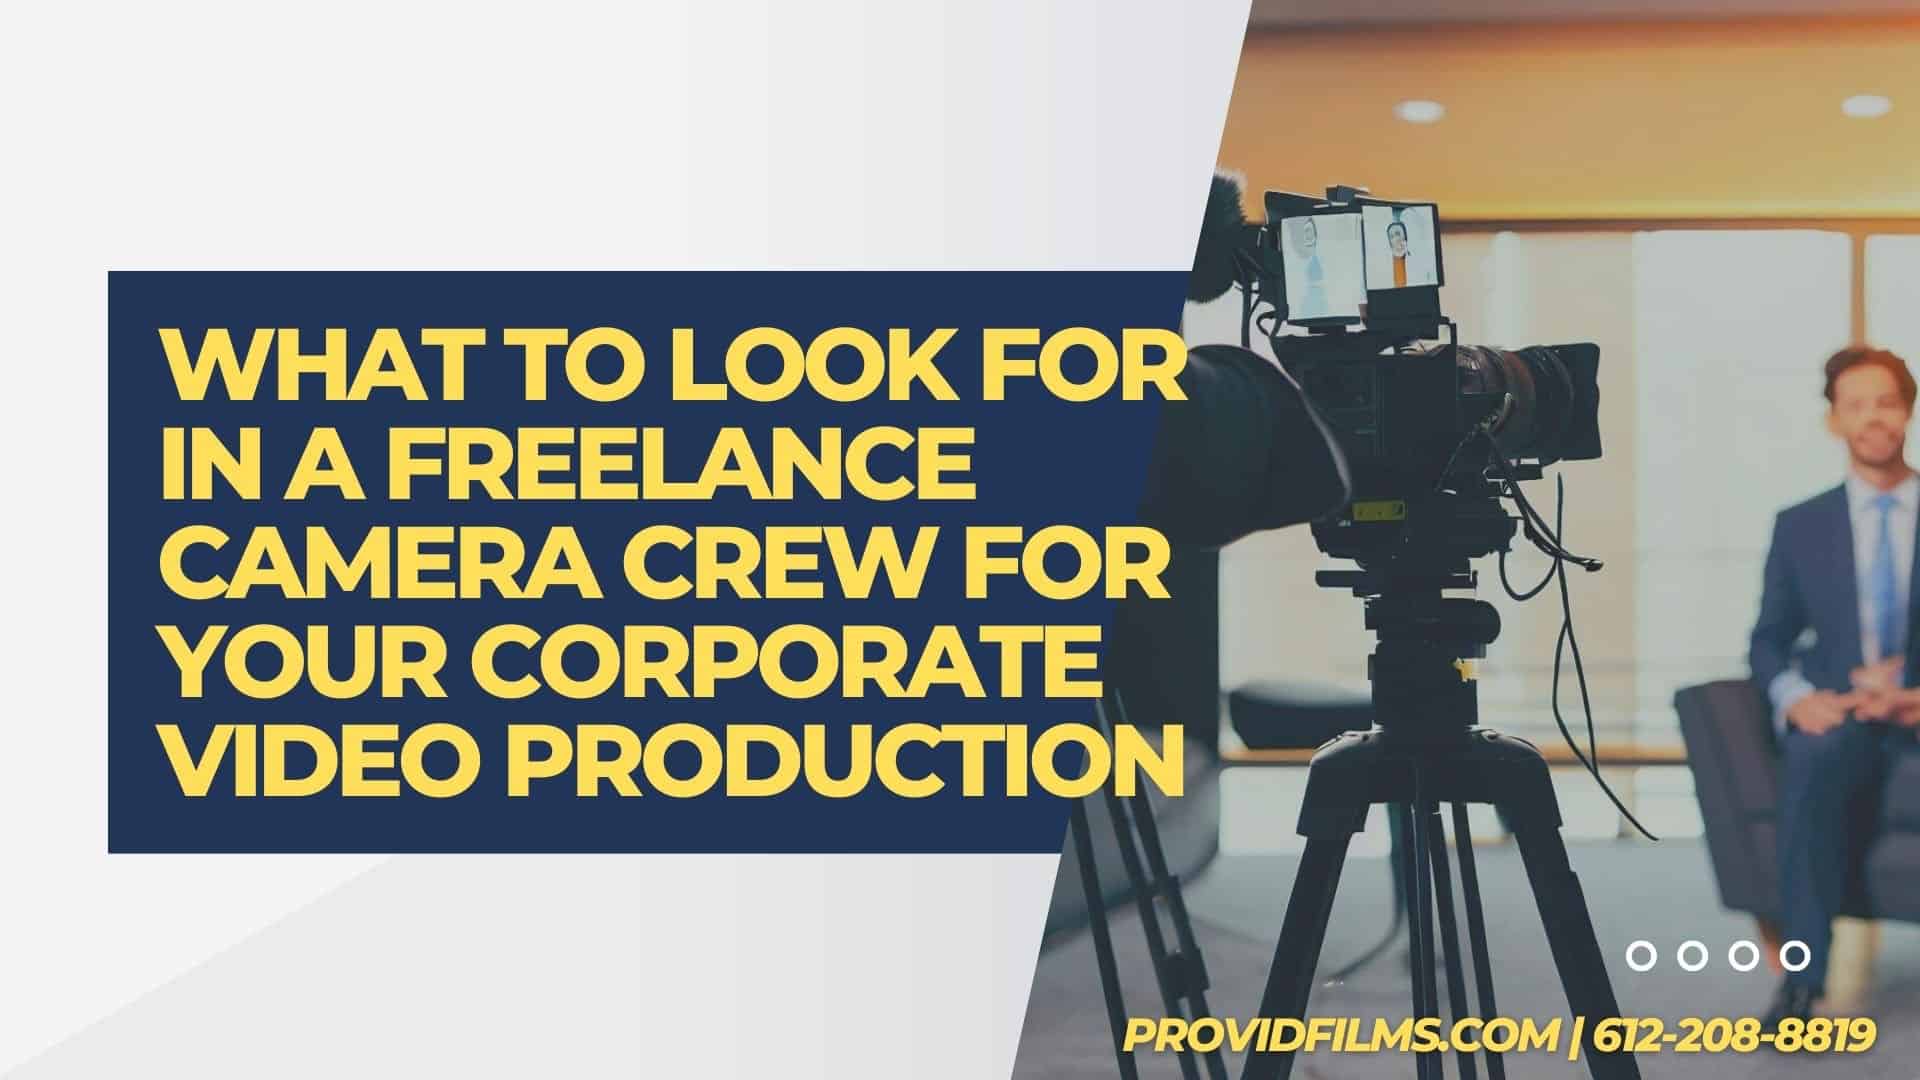 Graphic of a man and a video camera in an office with the text saying "What to Look for in a Freelance Camera Crew for Your Corporate Video Production"